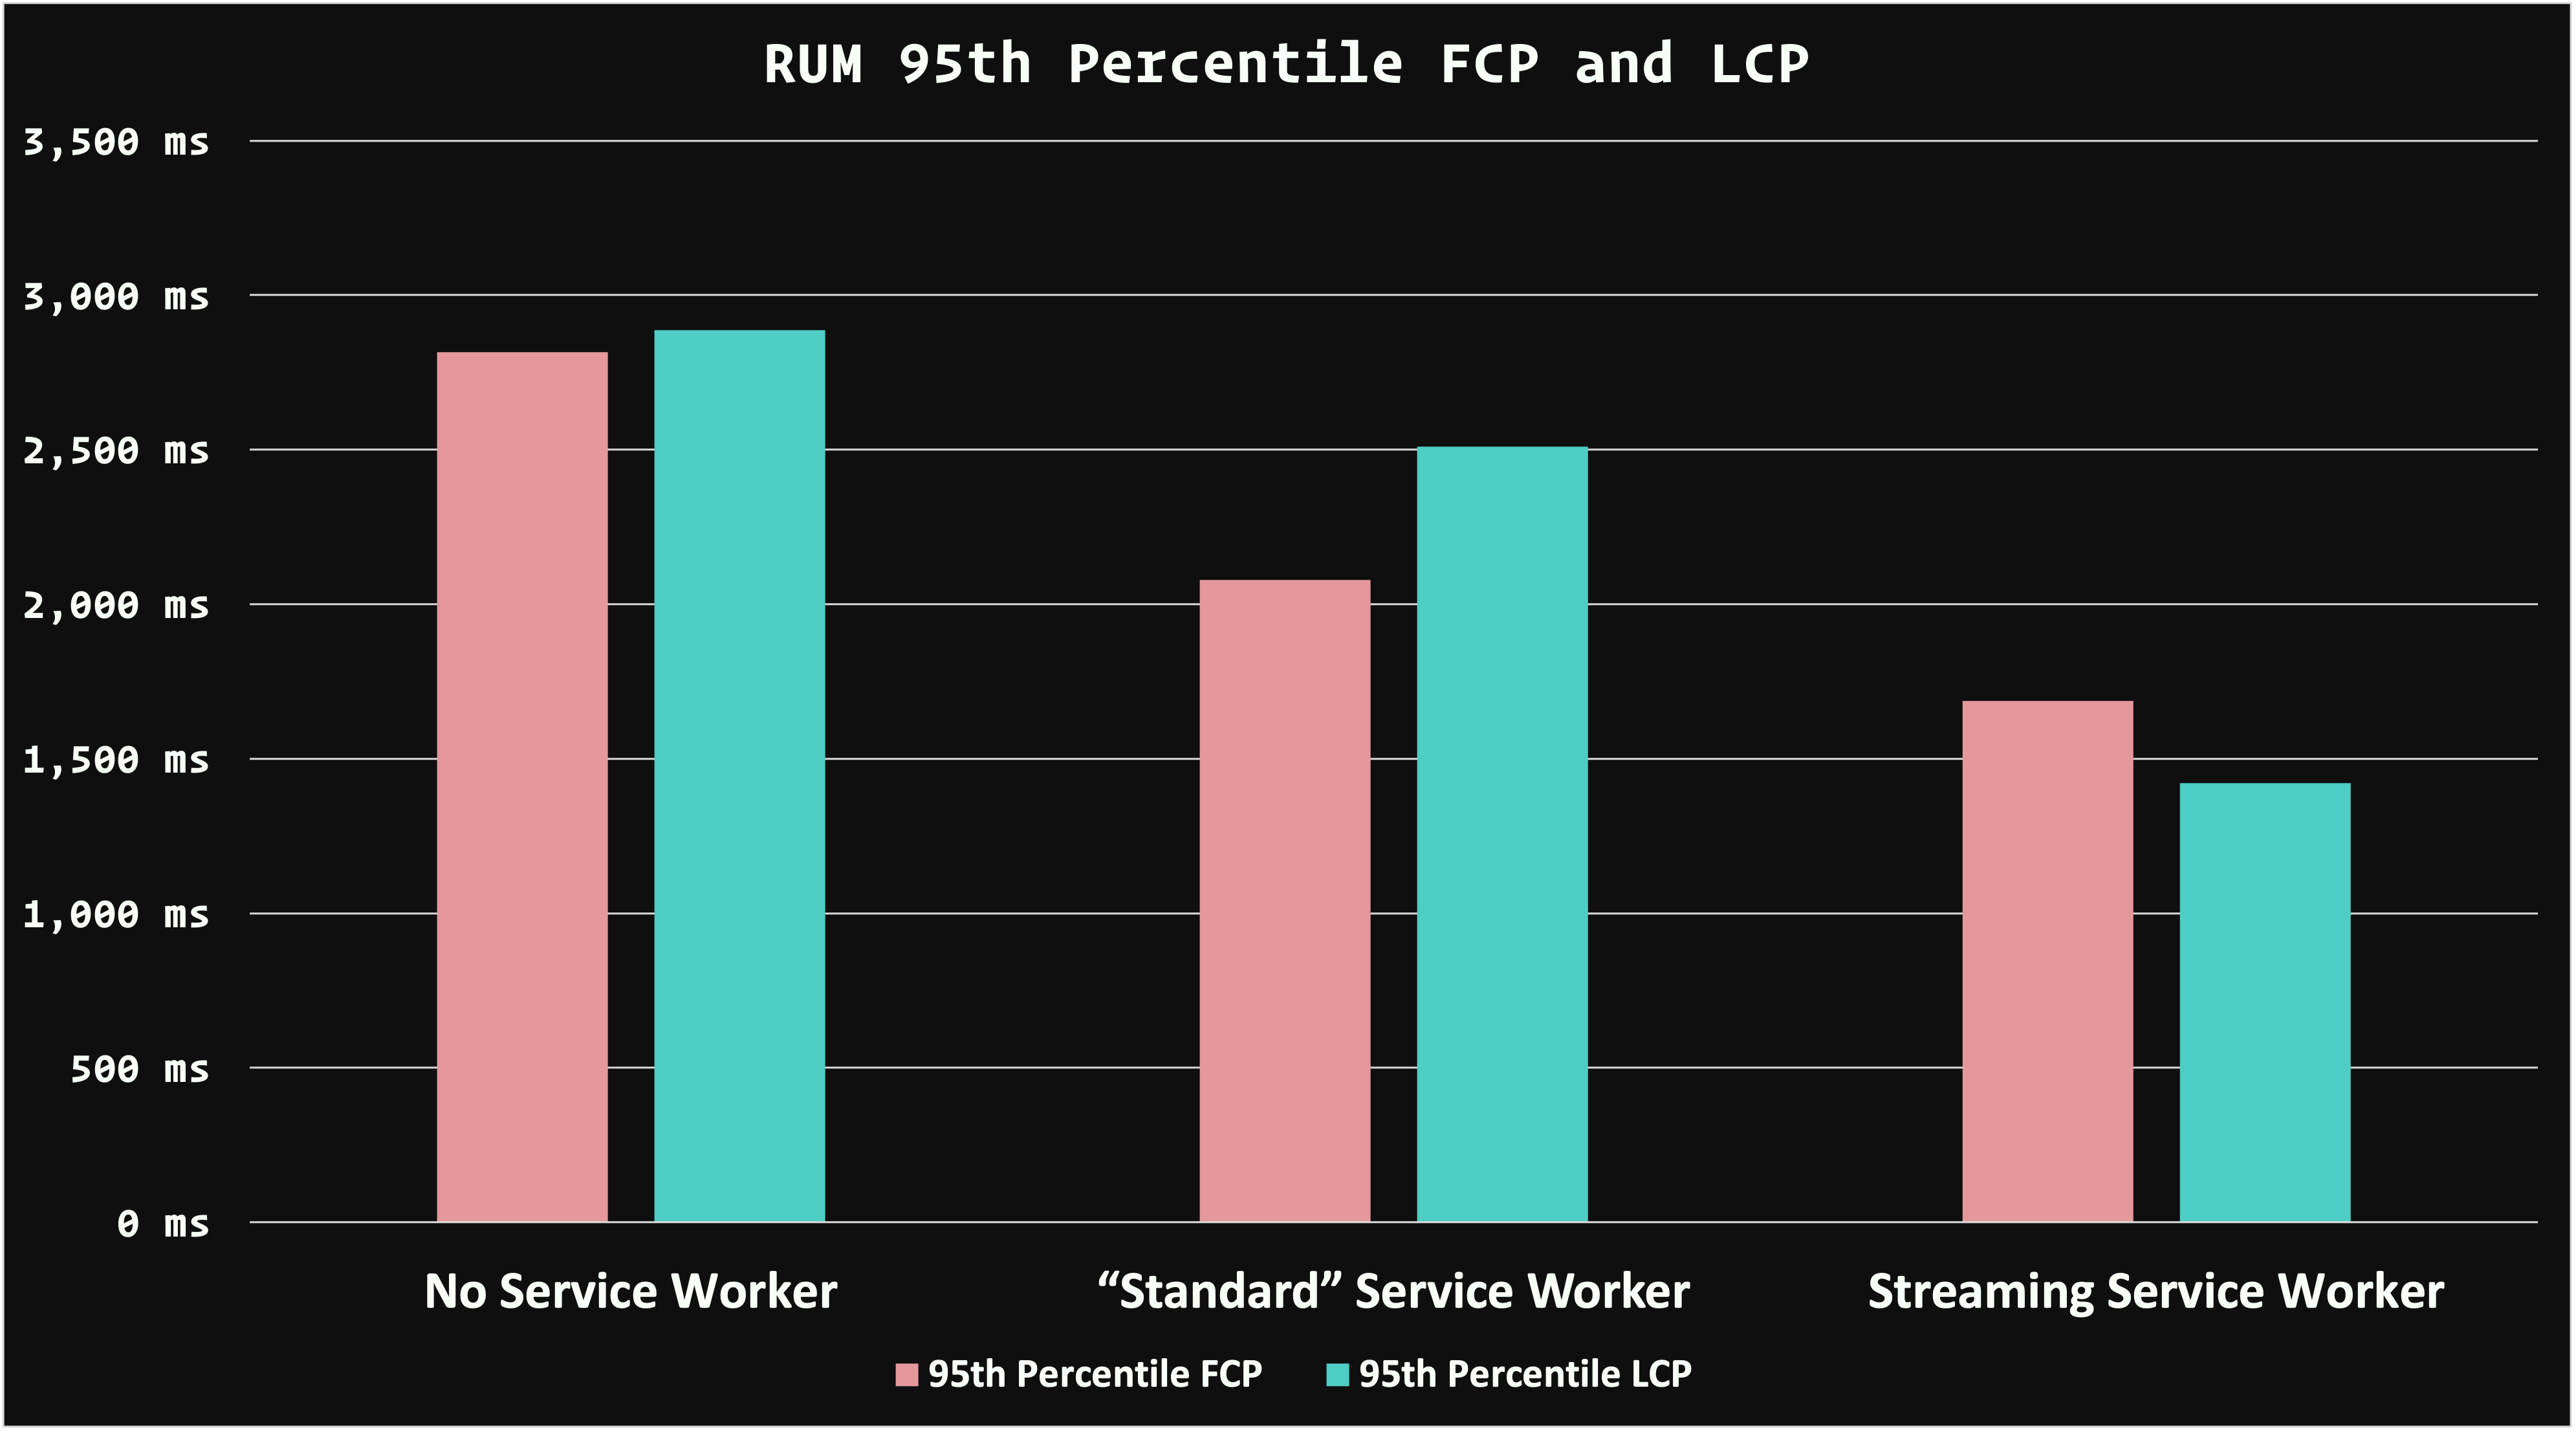 A bar chart comparing the RUM median FCP and LCP performance of no service worker, a "standard" service worker, and a streaming service worker. Both the "standard" and streaming service workers are faster than no service worker at all, but the streaming service worker beats out the "standard" service worker for both FCP and LCP.